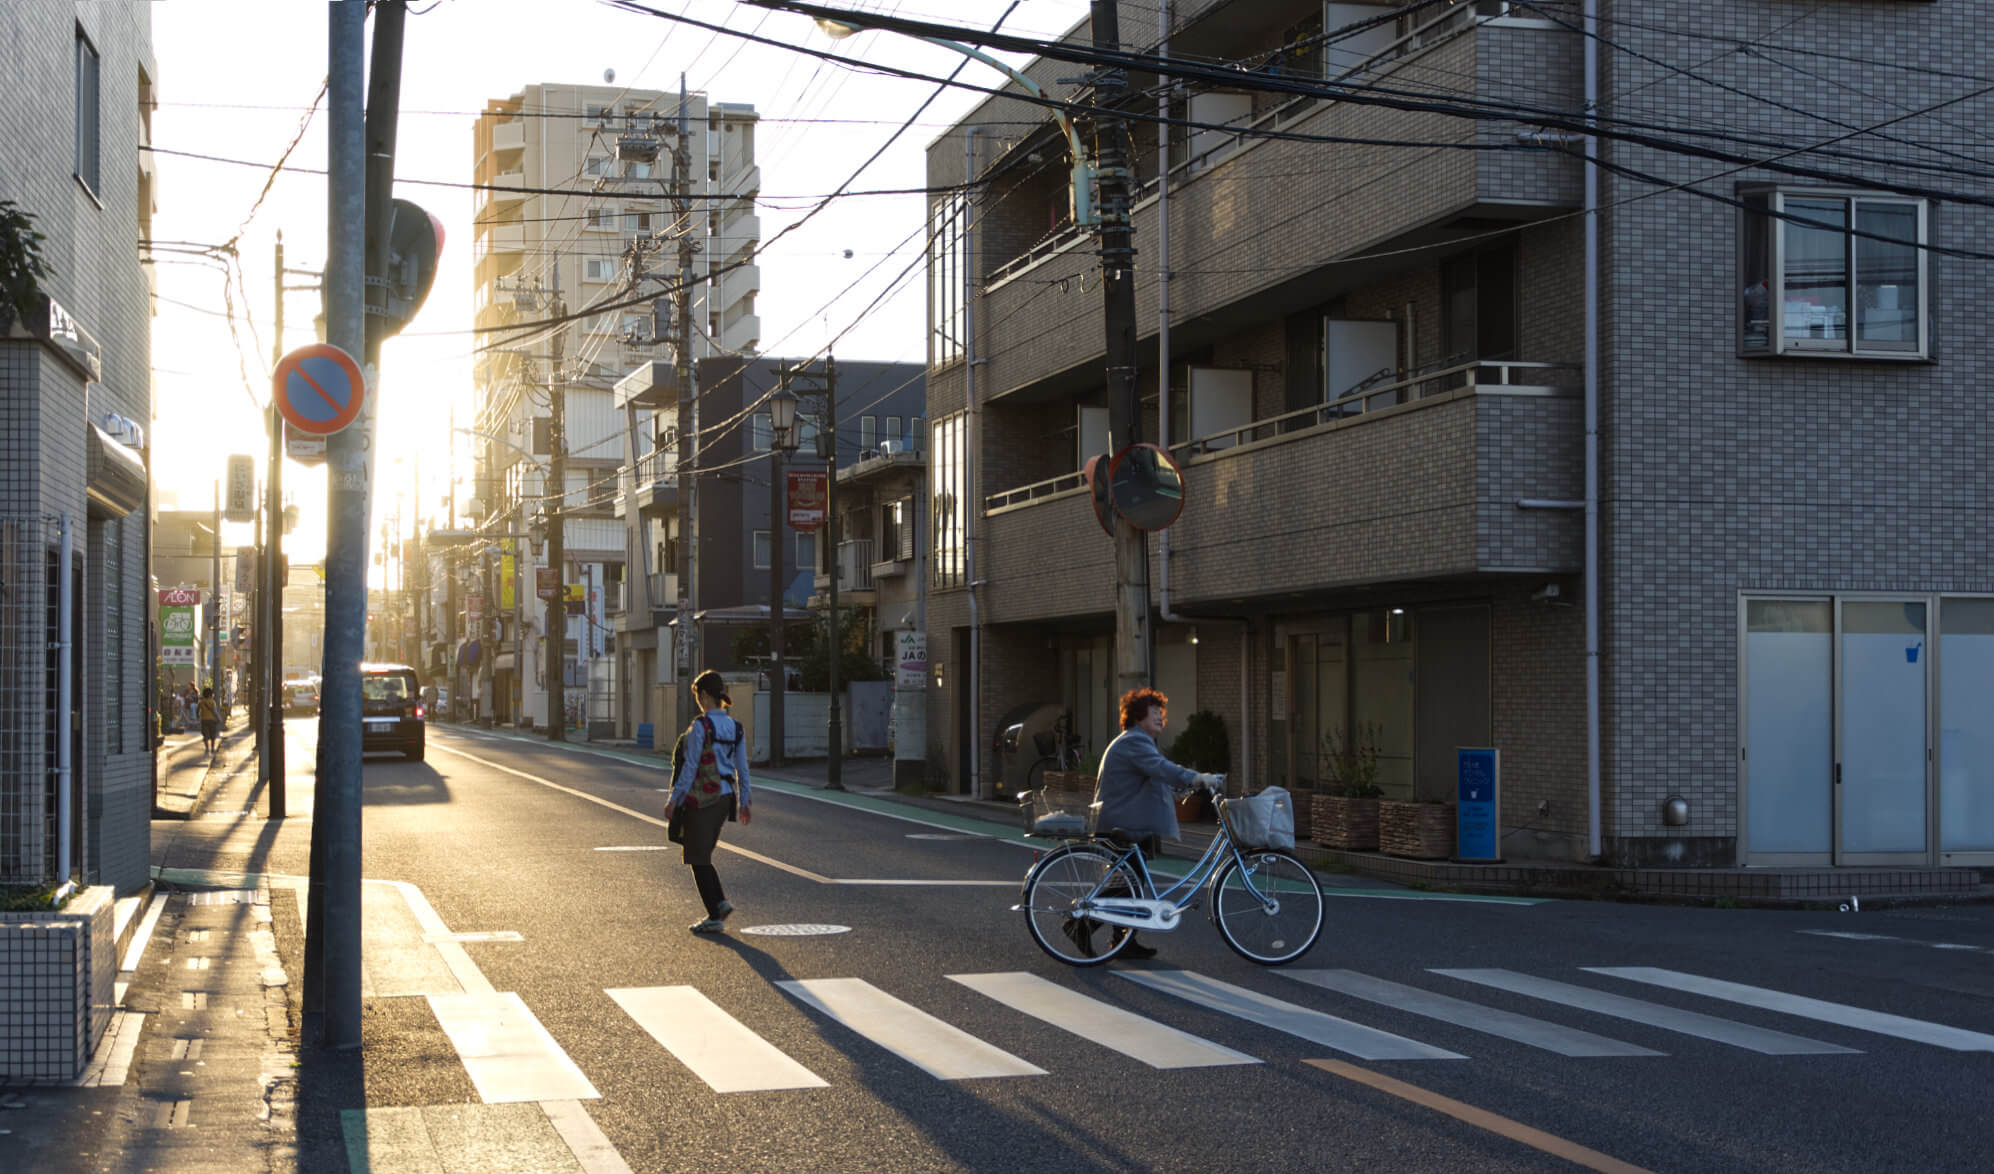 A road crossing at sunset. A young woman crosses the street to the light, her shadow stretching outwards. An older woman wheels a bike towards the opposite side. A mess of cables criss-crosses overhead.